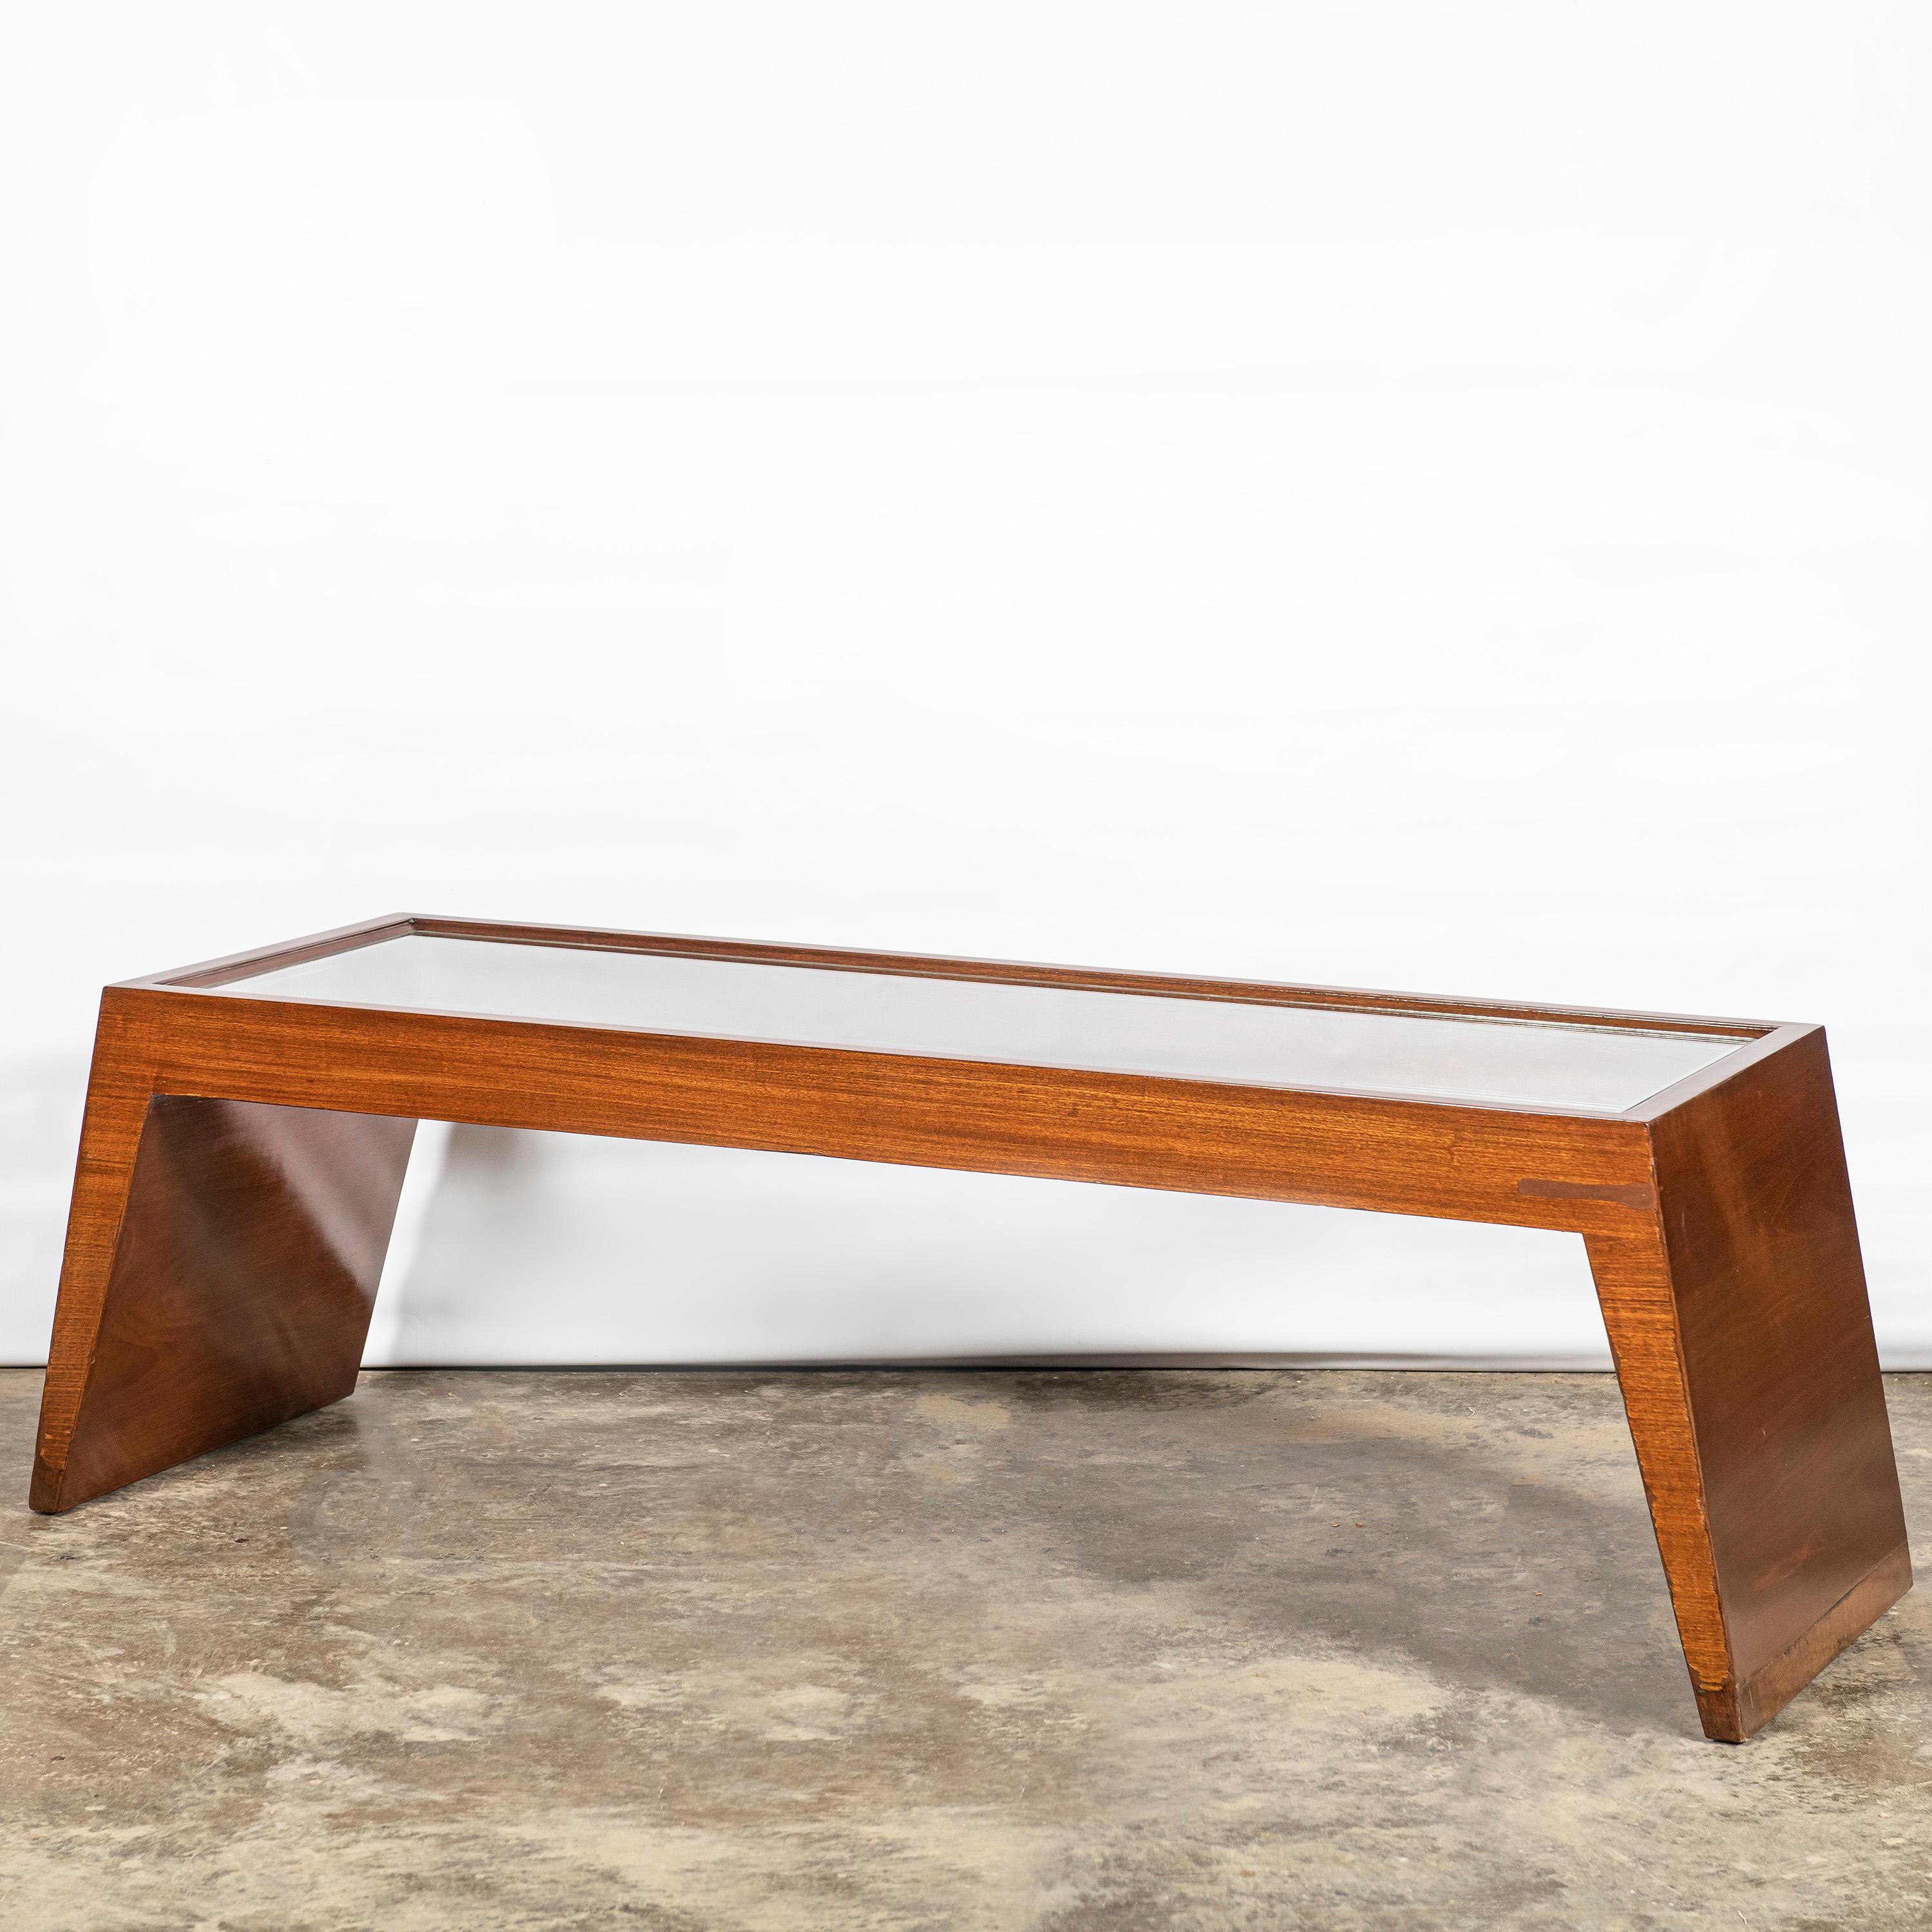 Pair of wood and glass low tables by Nordiska, Argentina, Buenos Aires, circa 1950.